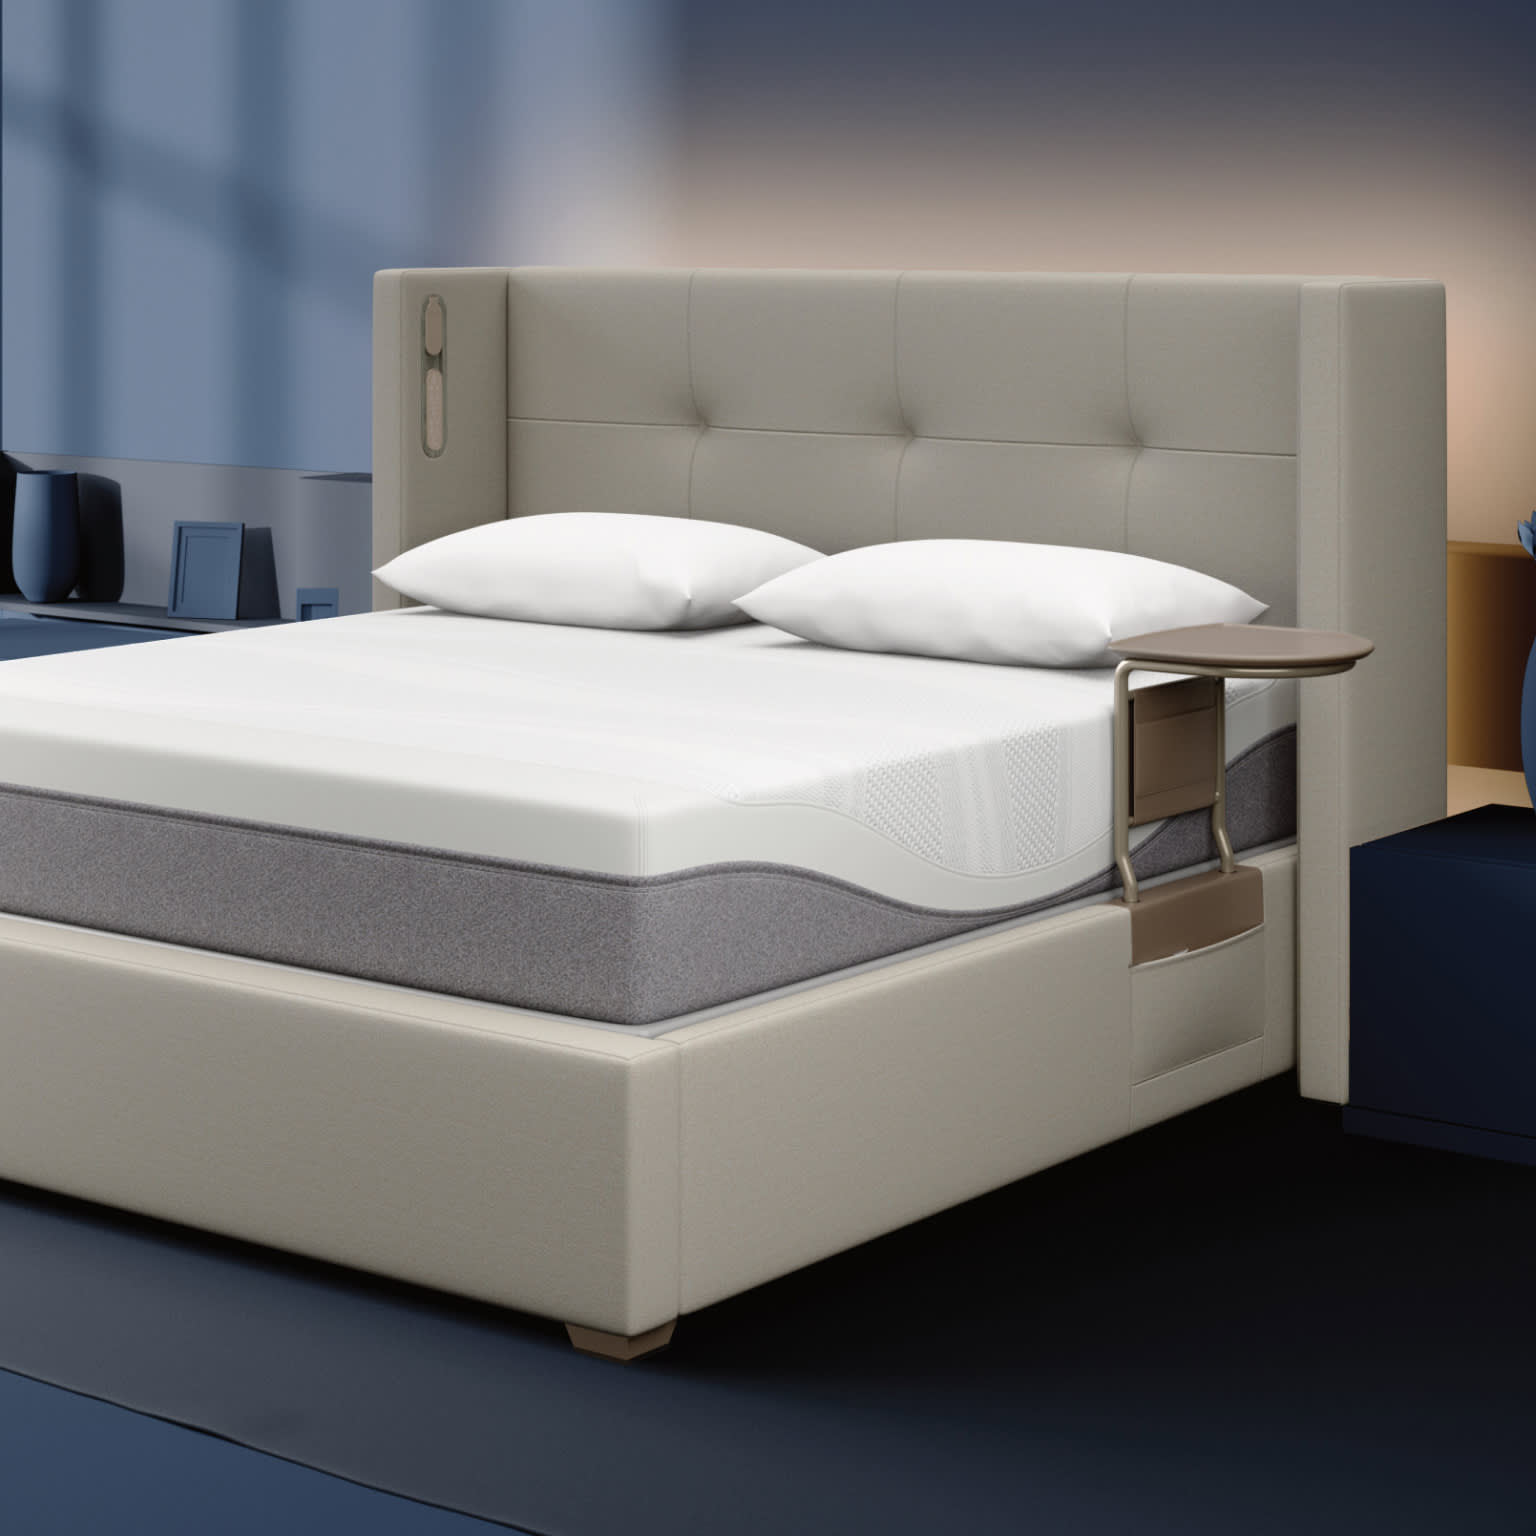 https://cdn.sleepnumber.com/image/upload/f_auto,q_auto:eco/v1680365051/workarea/catalog/product_images/side-table/Optional-Side-Table_PDP_Postcard_Gallery2